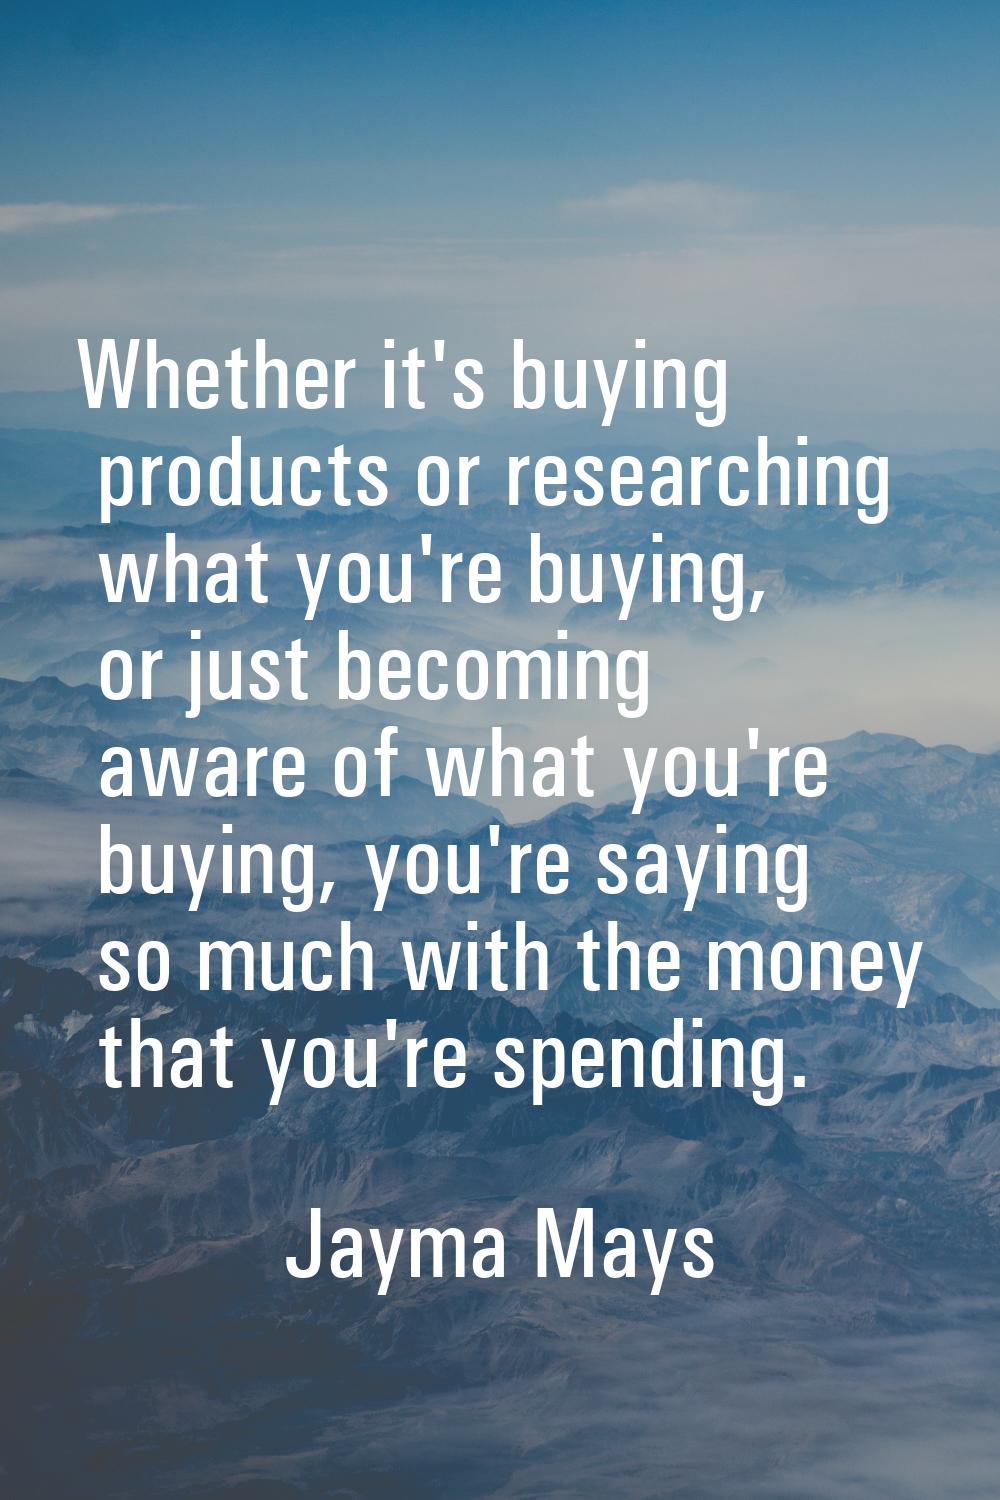 Whether it's buying products or researching what you're buying, or just becoming aware of what you'